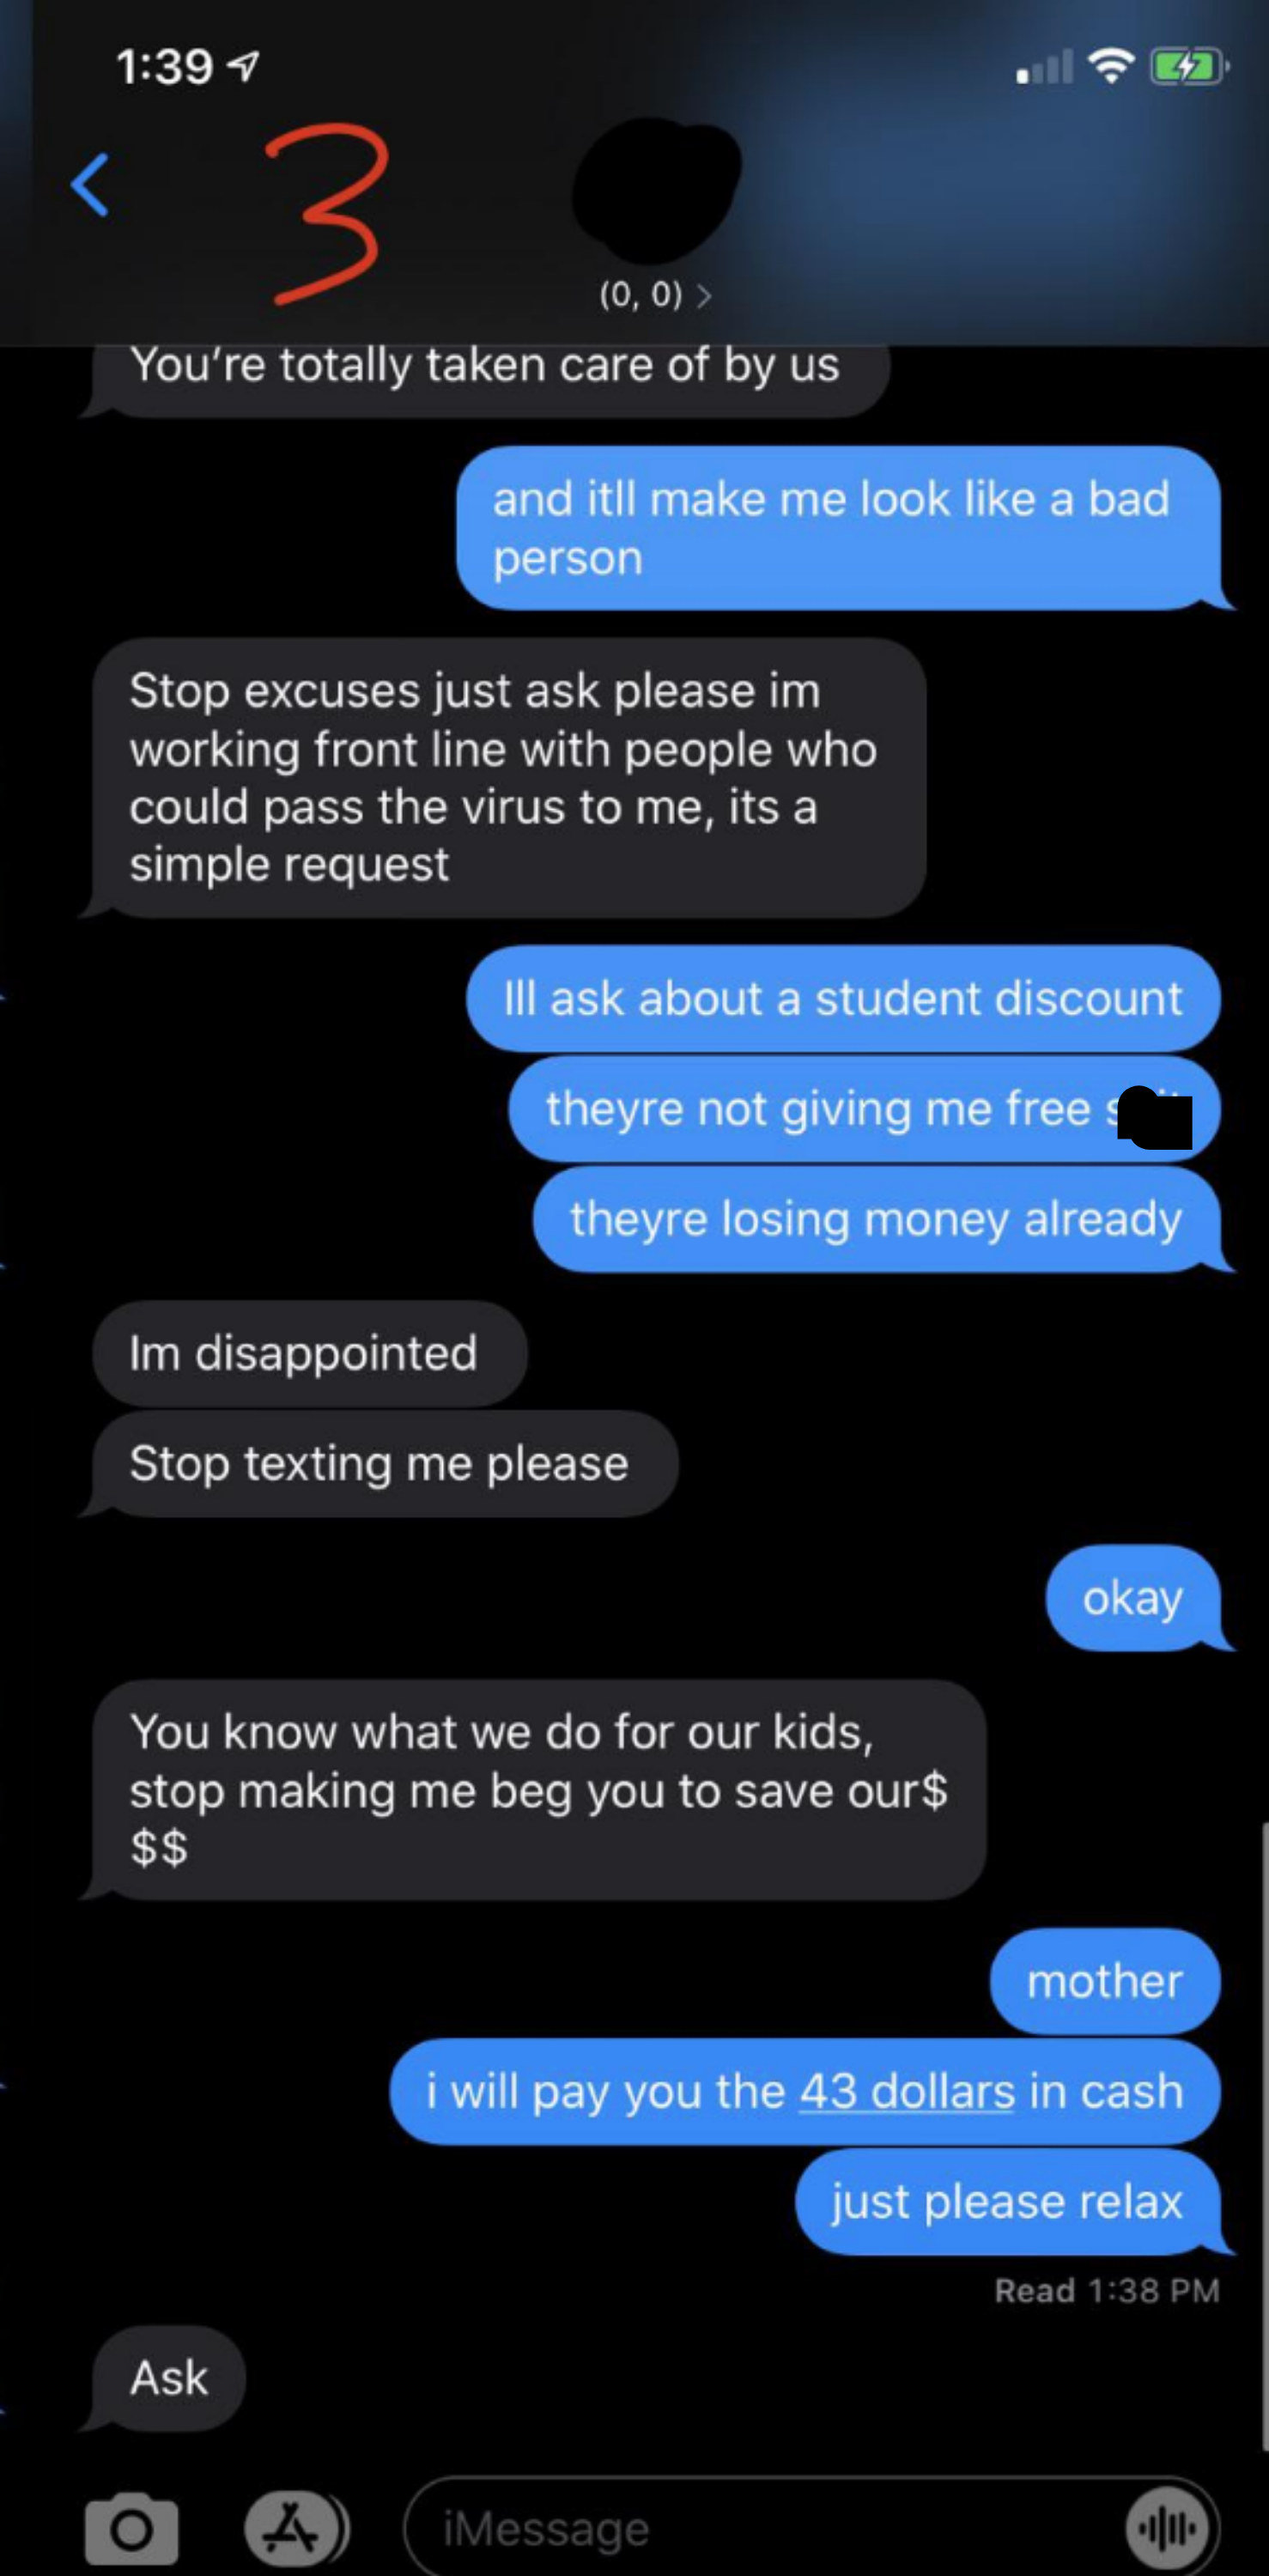 After the child continues to say they don&#x27;t want to do it, the mother says &quot;you know what we do for our kids, stop making me beg you to save our money&quot;